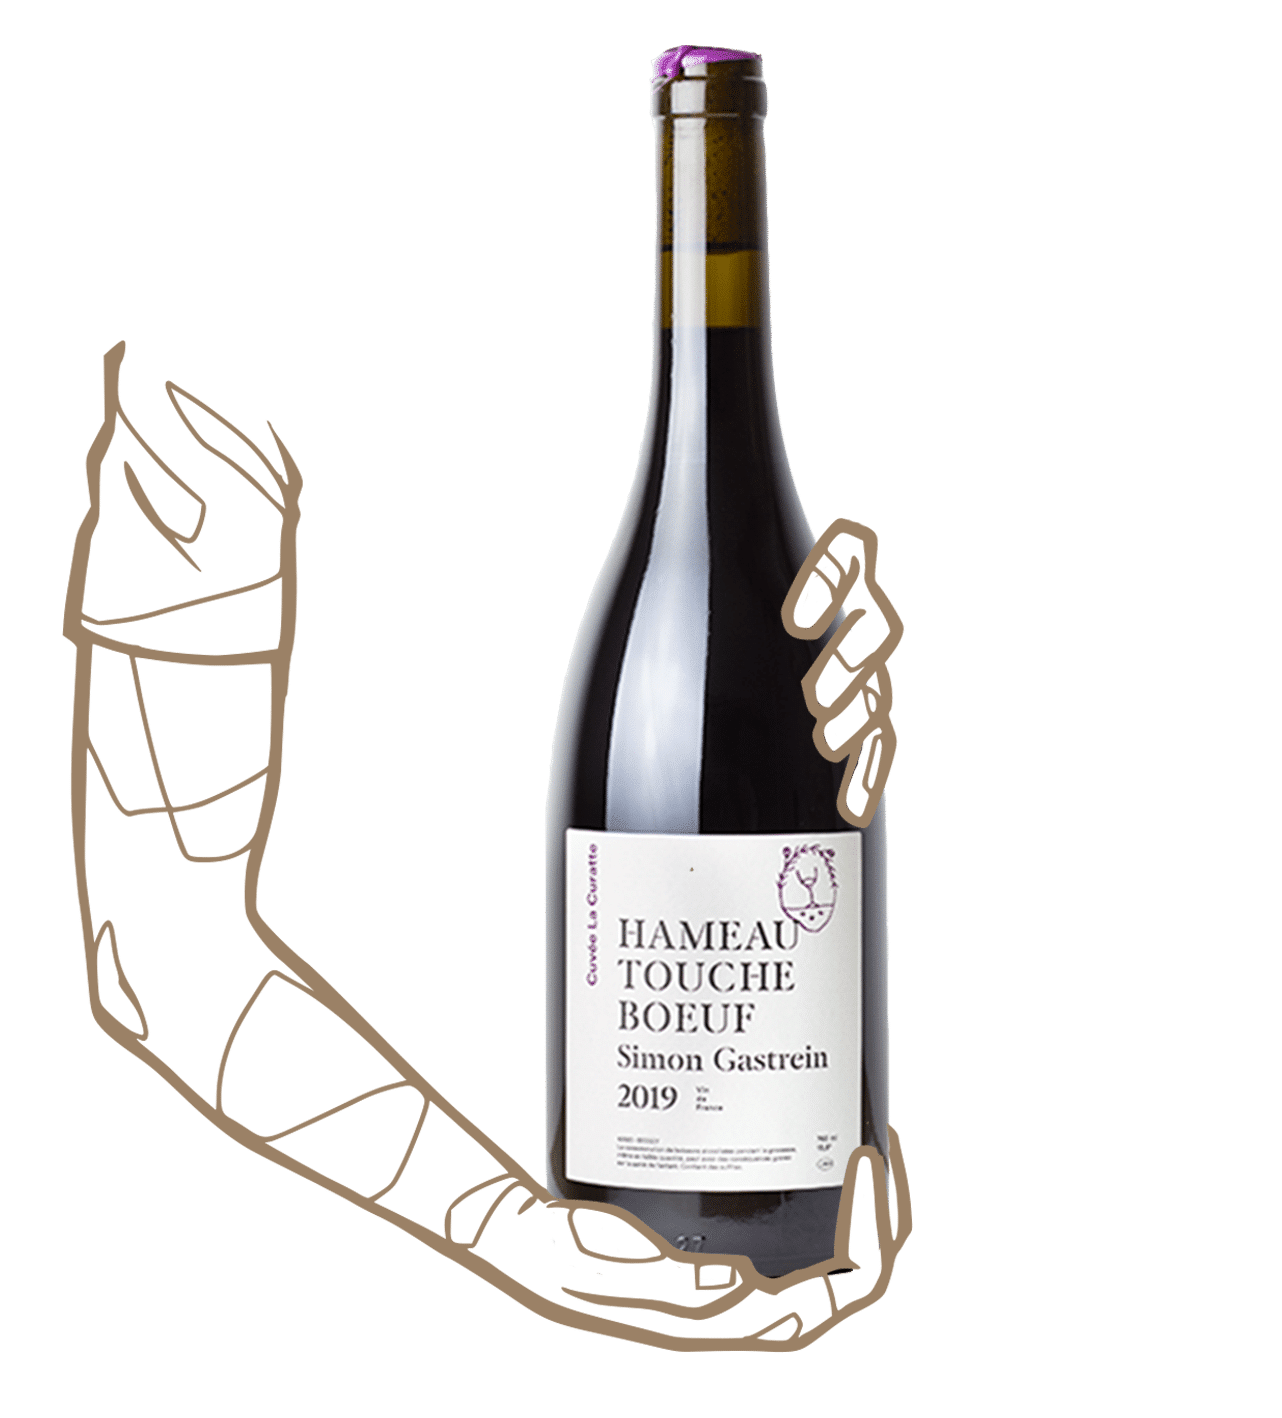 La Curatte by Hameau toucheboeuf is a natural wine